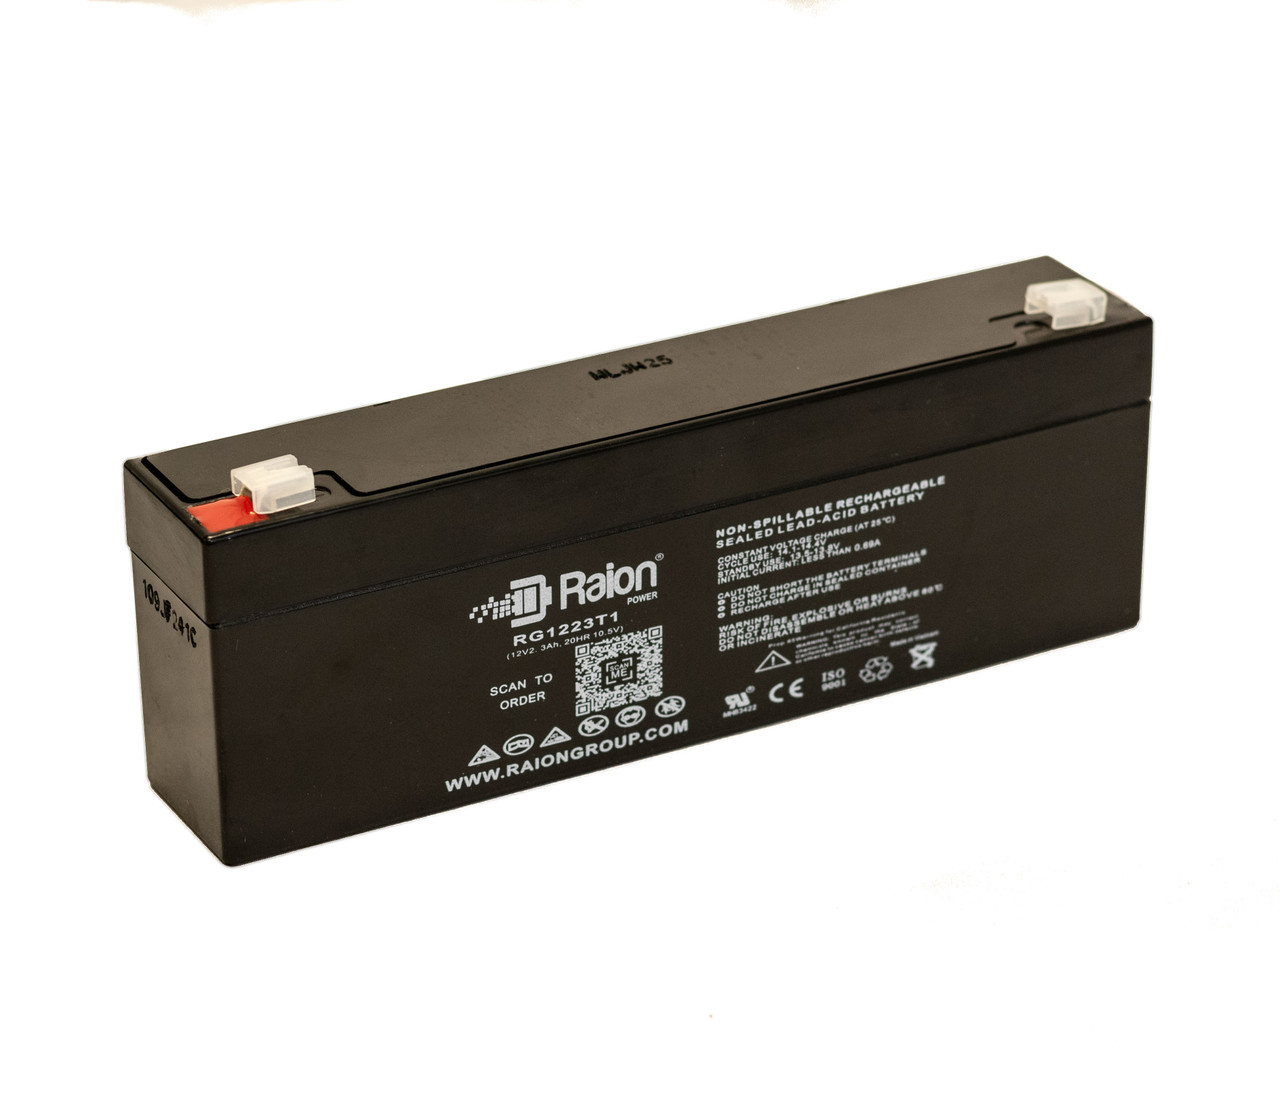 Raion Power RG1223T1 Replacement Battery for Criticare Systems POET TE Plus Oximeter